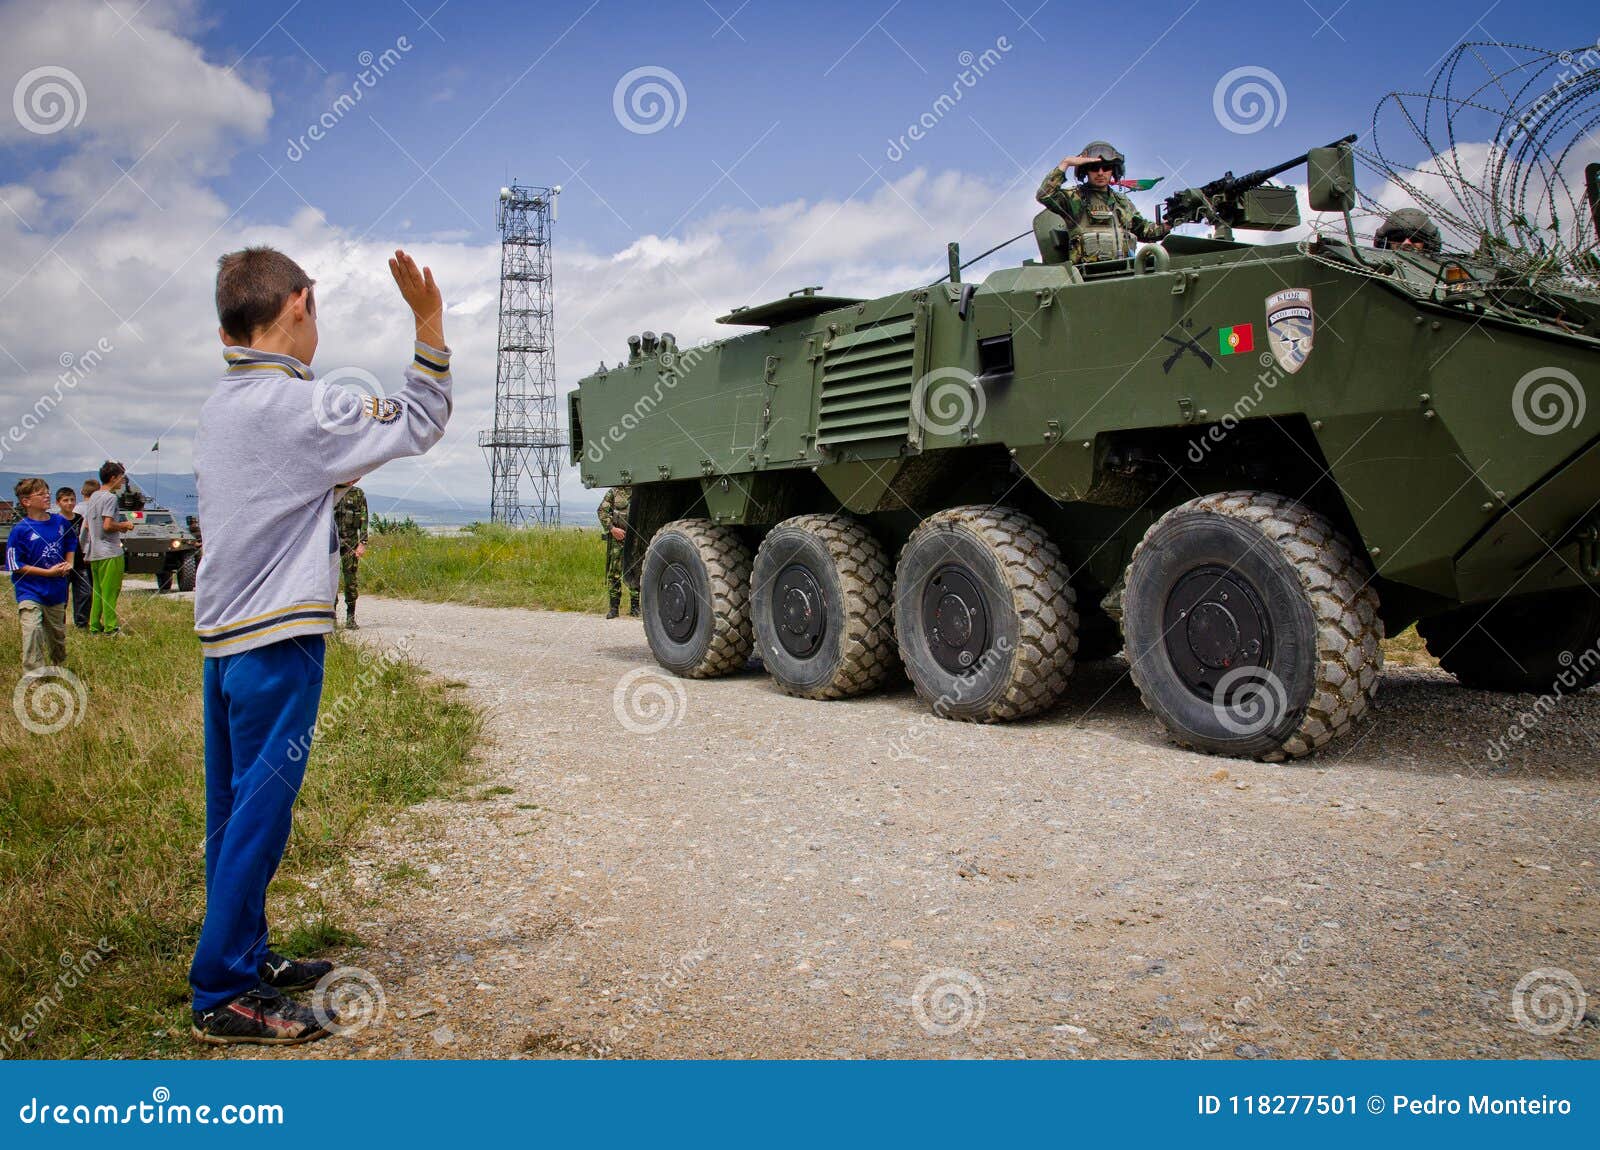 The image shows a young boy waving at a line of passing tanks. The tanks are are Portuguese under NATO command in Kosove